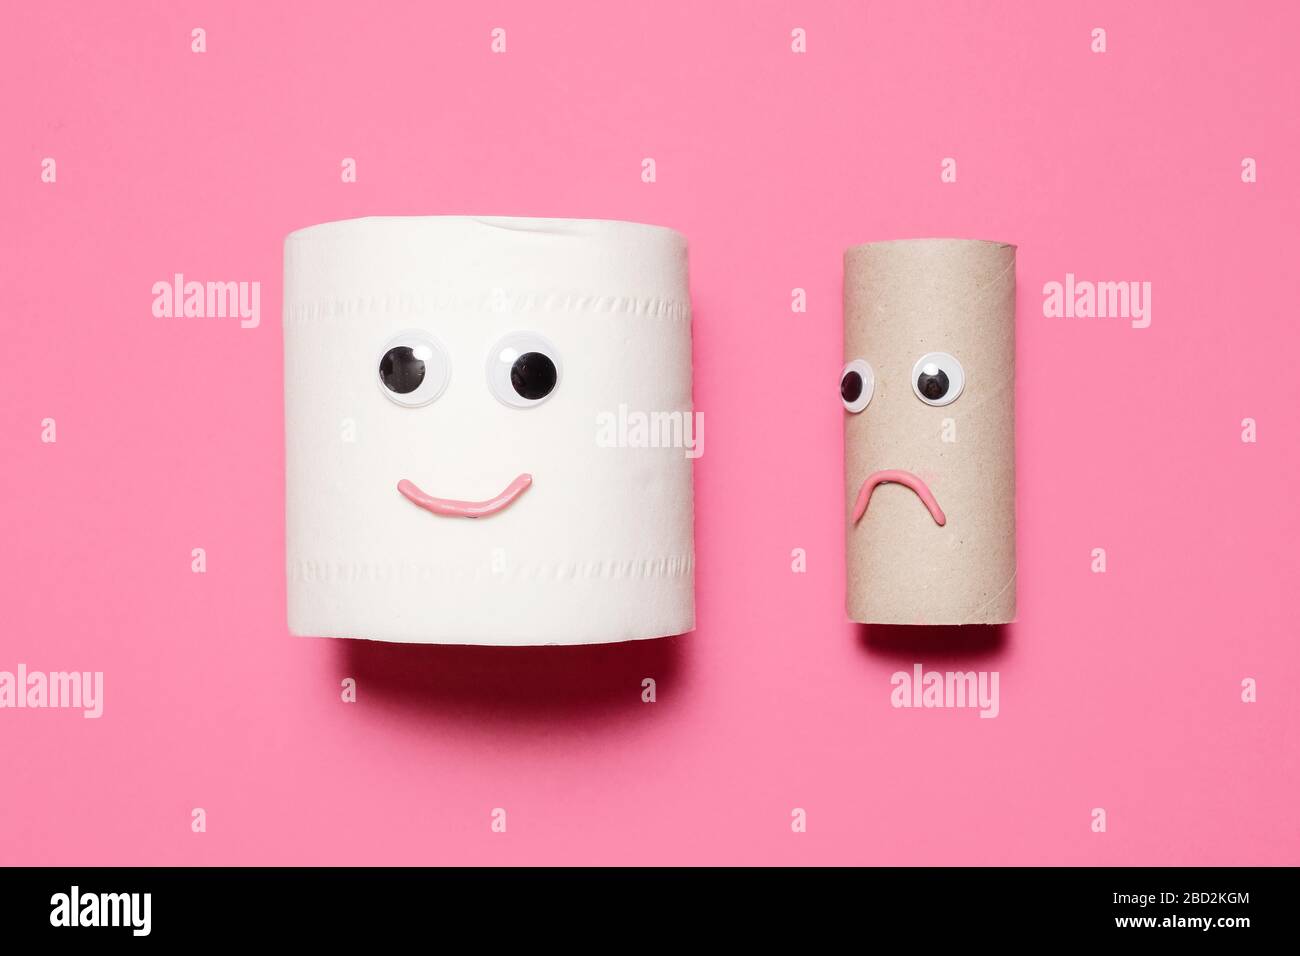 Happy and smiling full roll of toilet paper next to sad empty roll with googly eyes and mouth on a pink background with copy space and room for text. Stock Photo